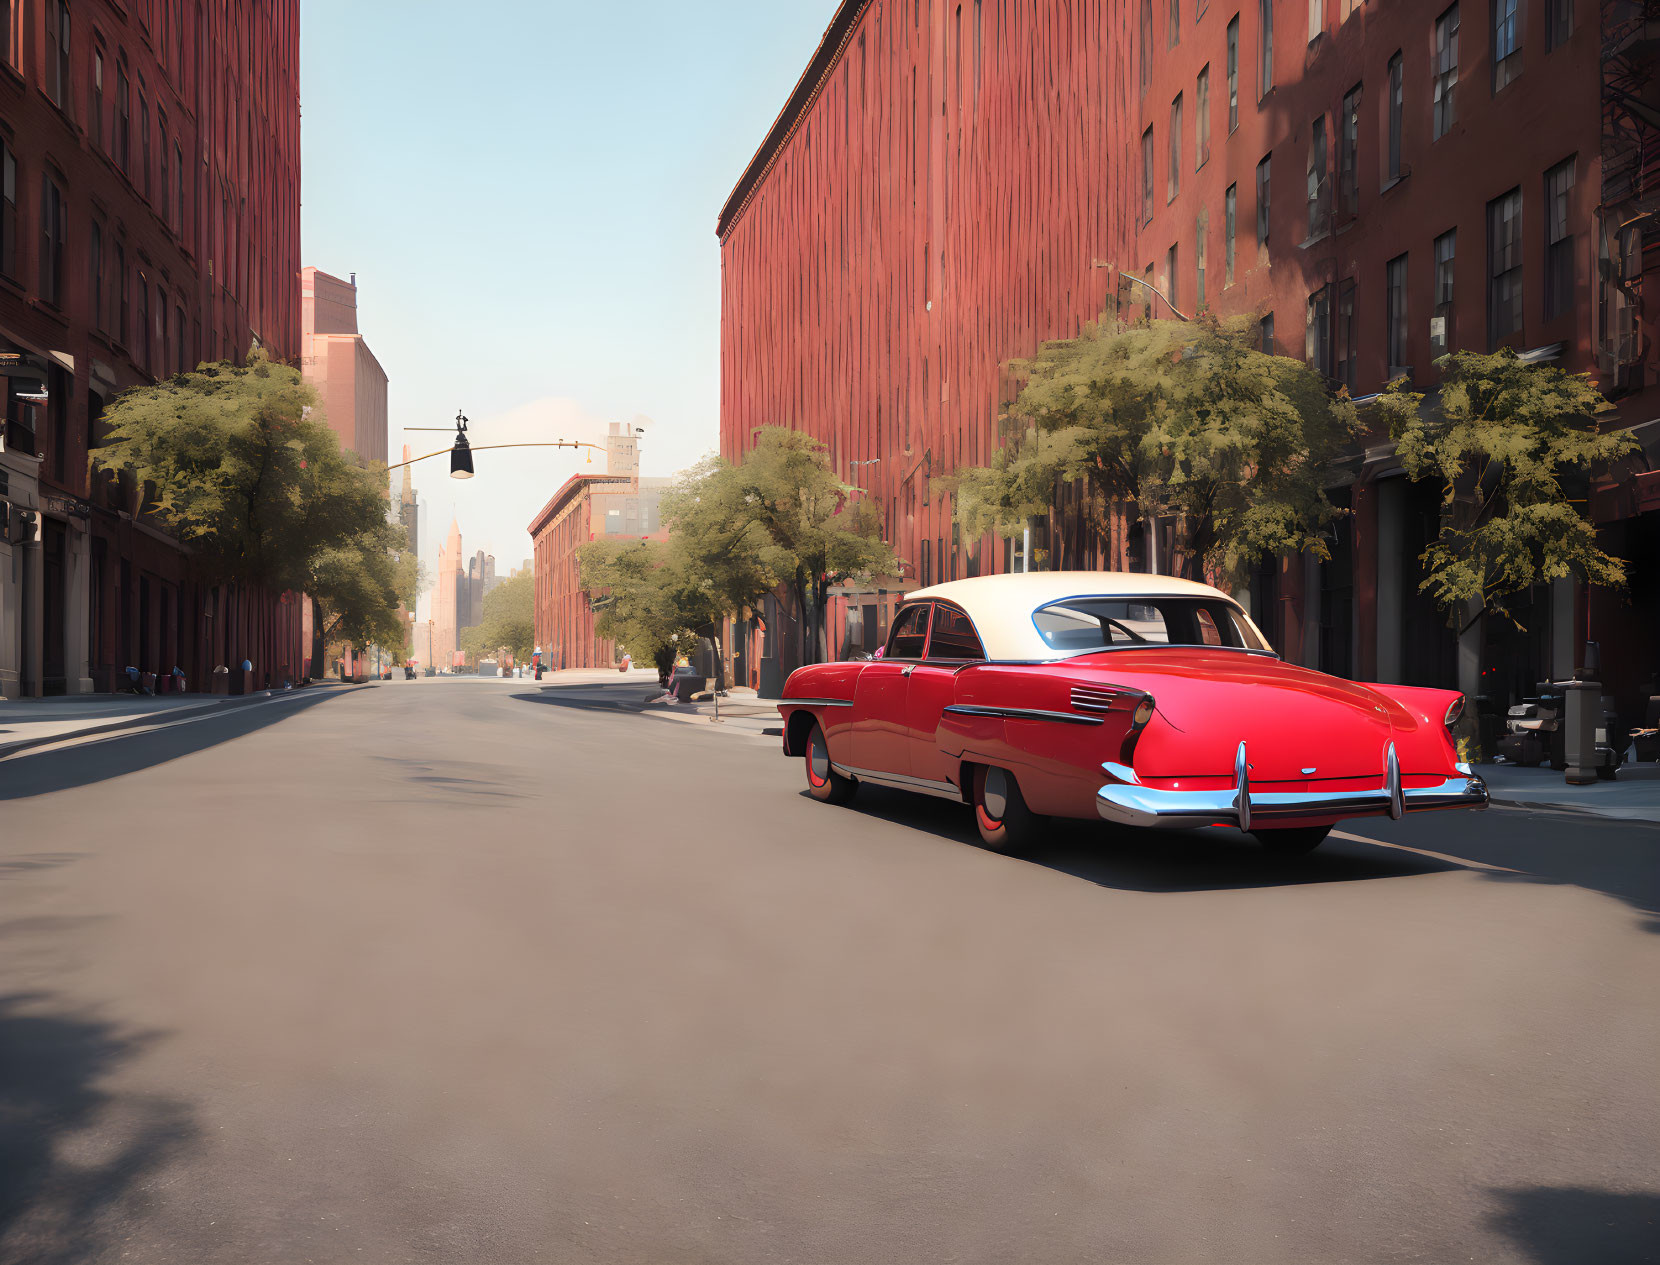 Vintage Red Car Parked on Empty City Street with Trees and Red Brick Buildings